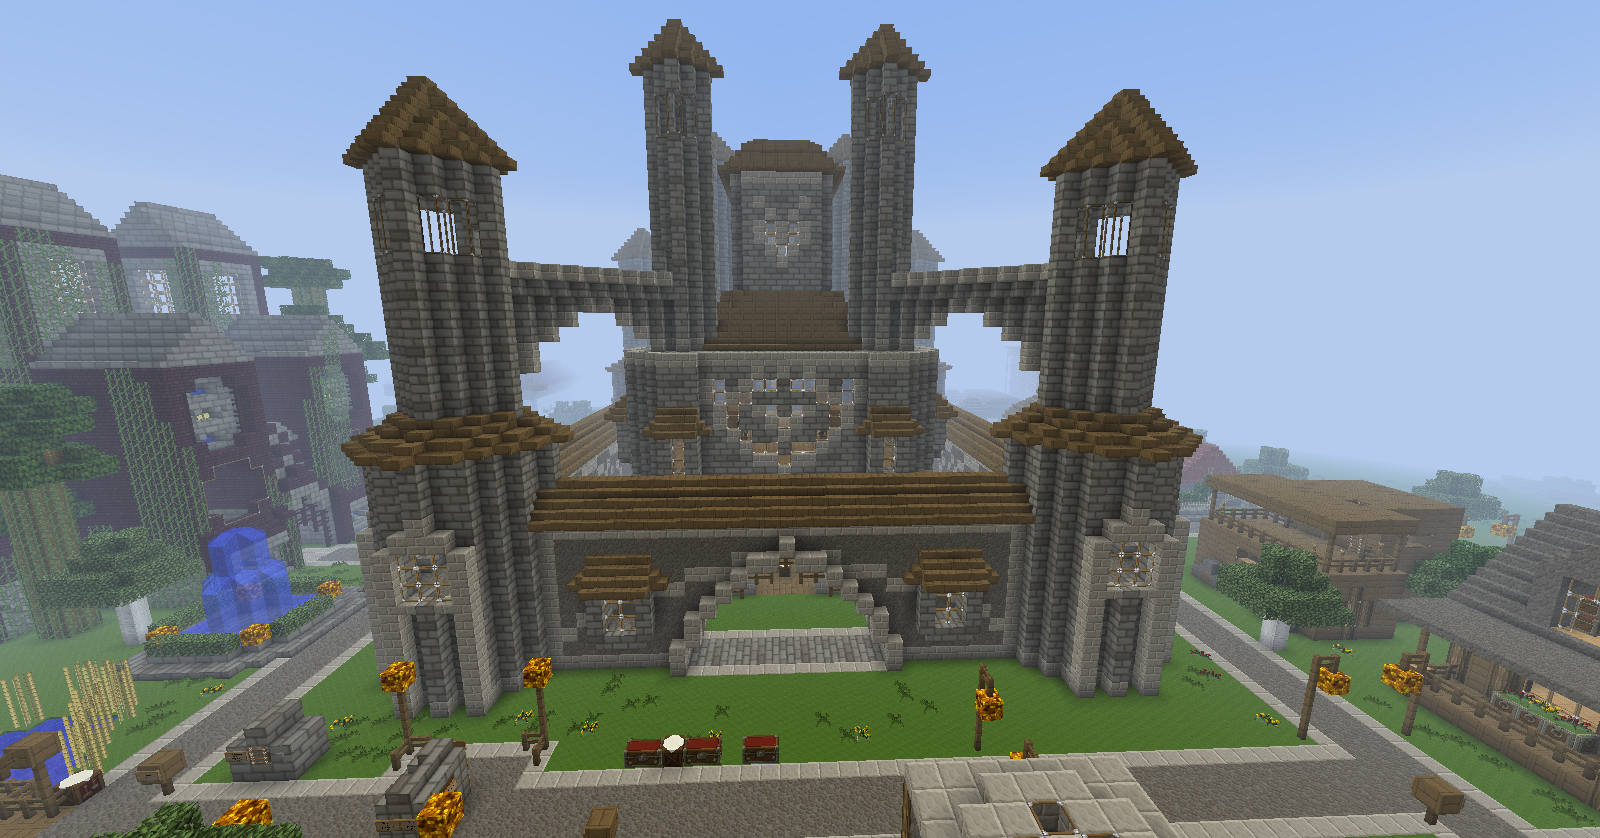 Huge Awesome Castle Build In Survival